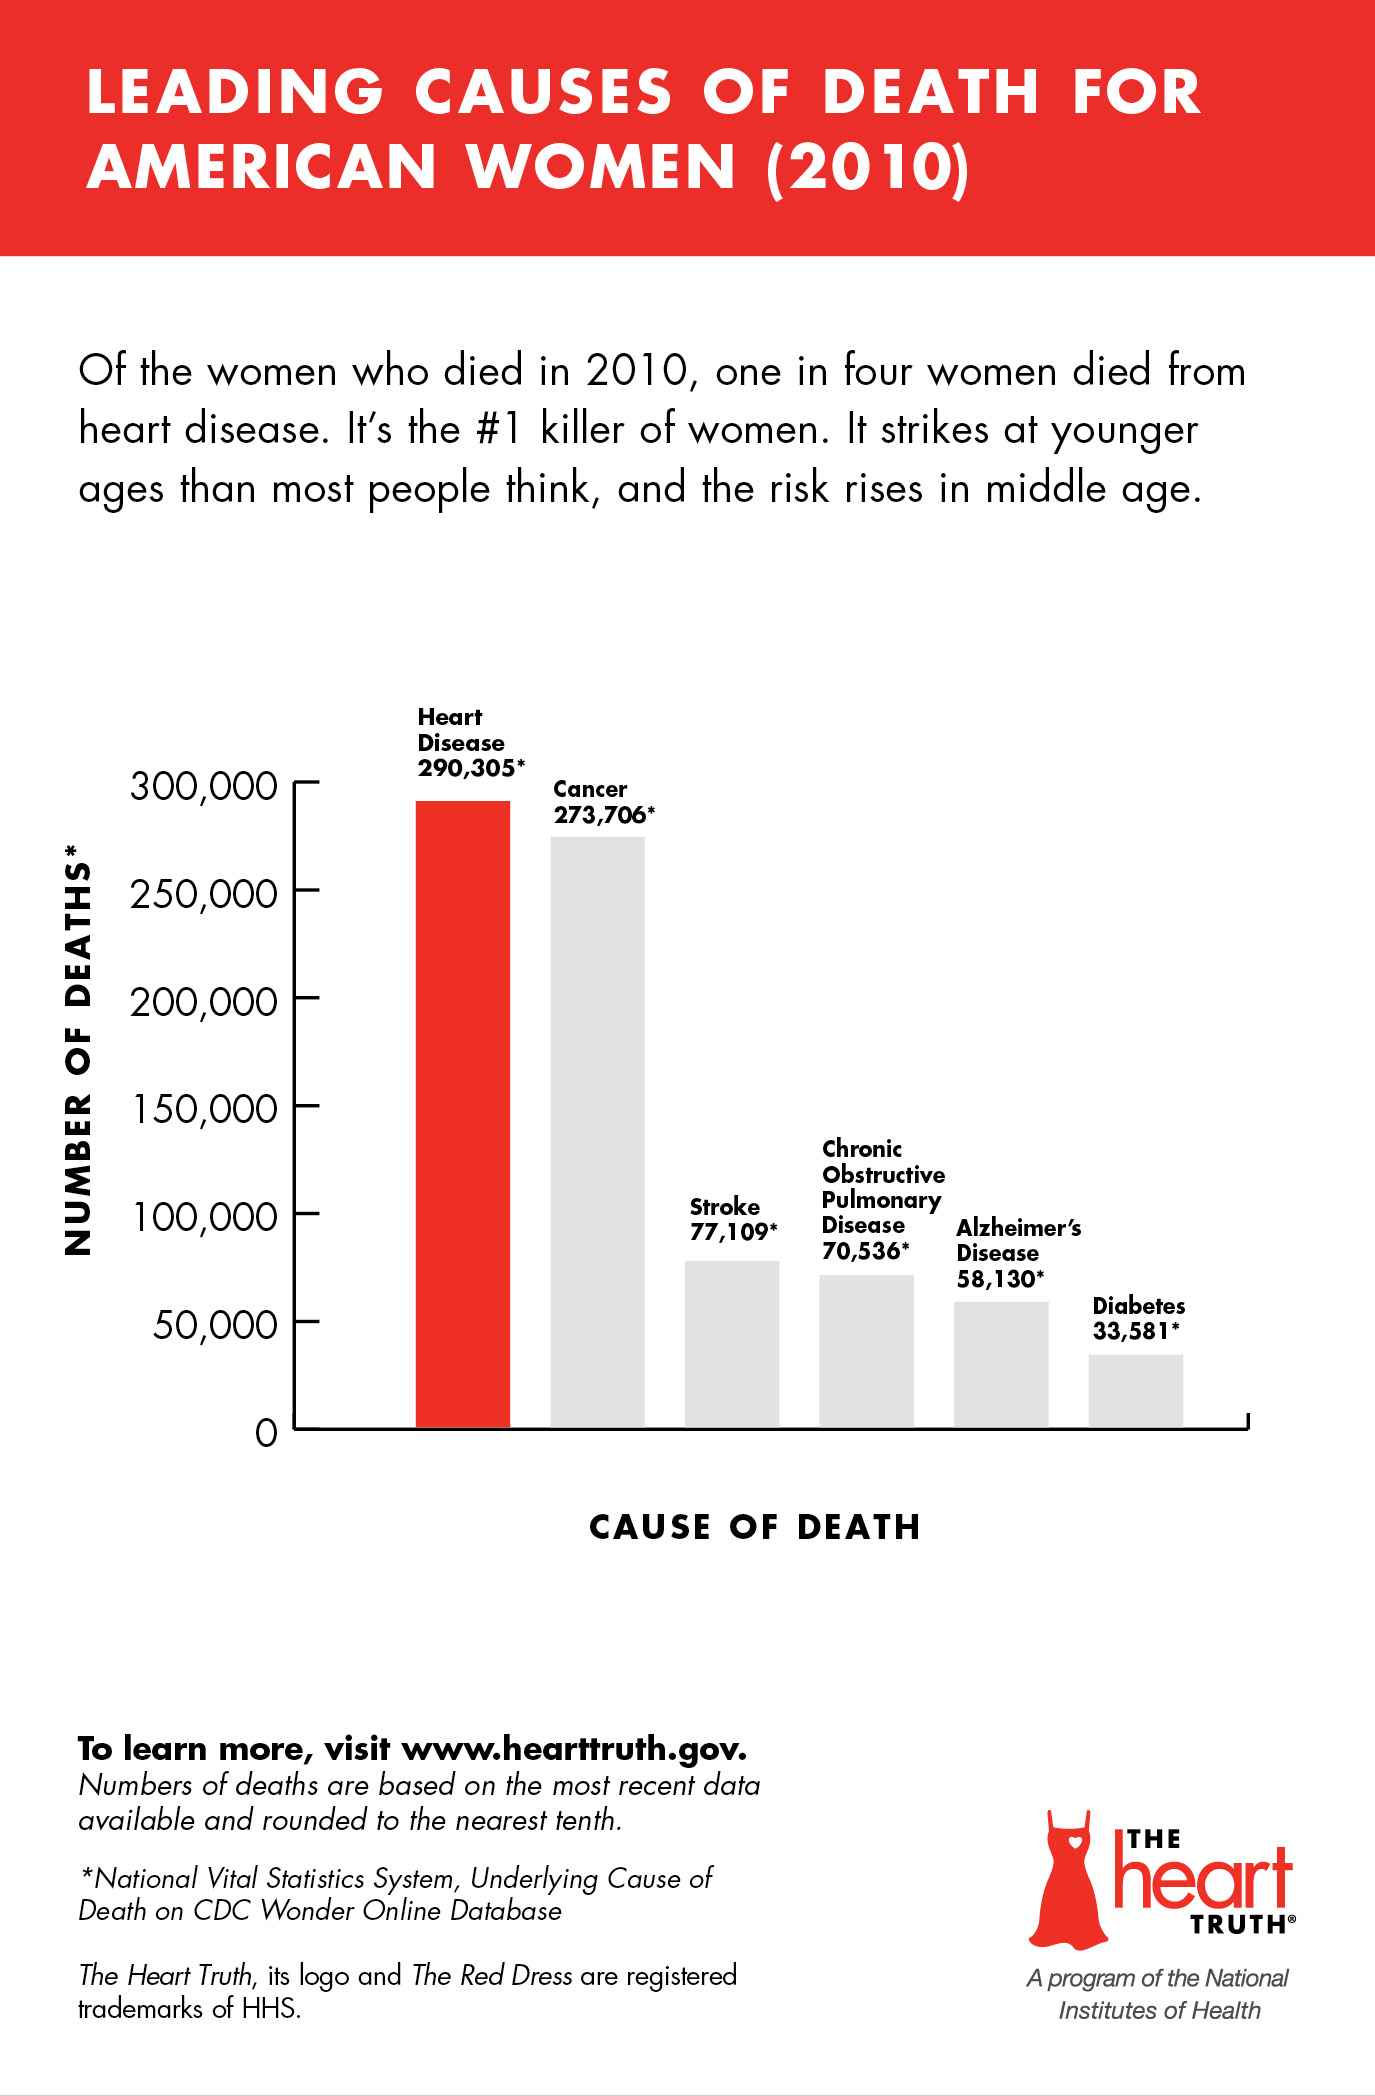 Leading Causes of Death for American Women (2010).